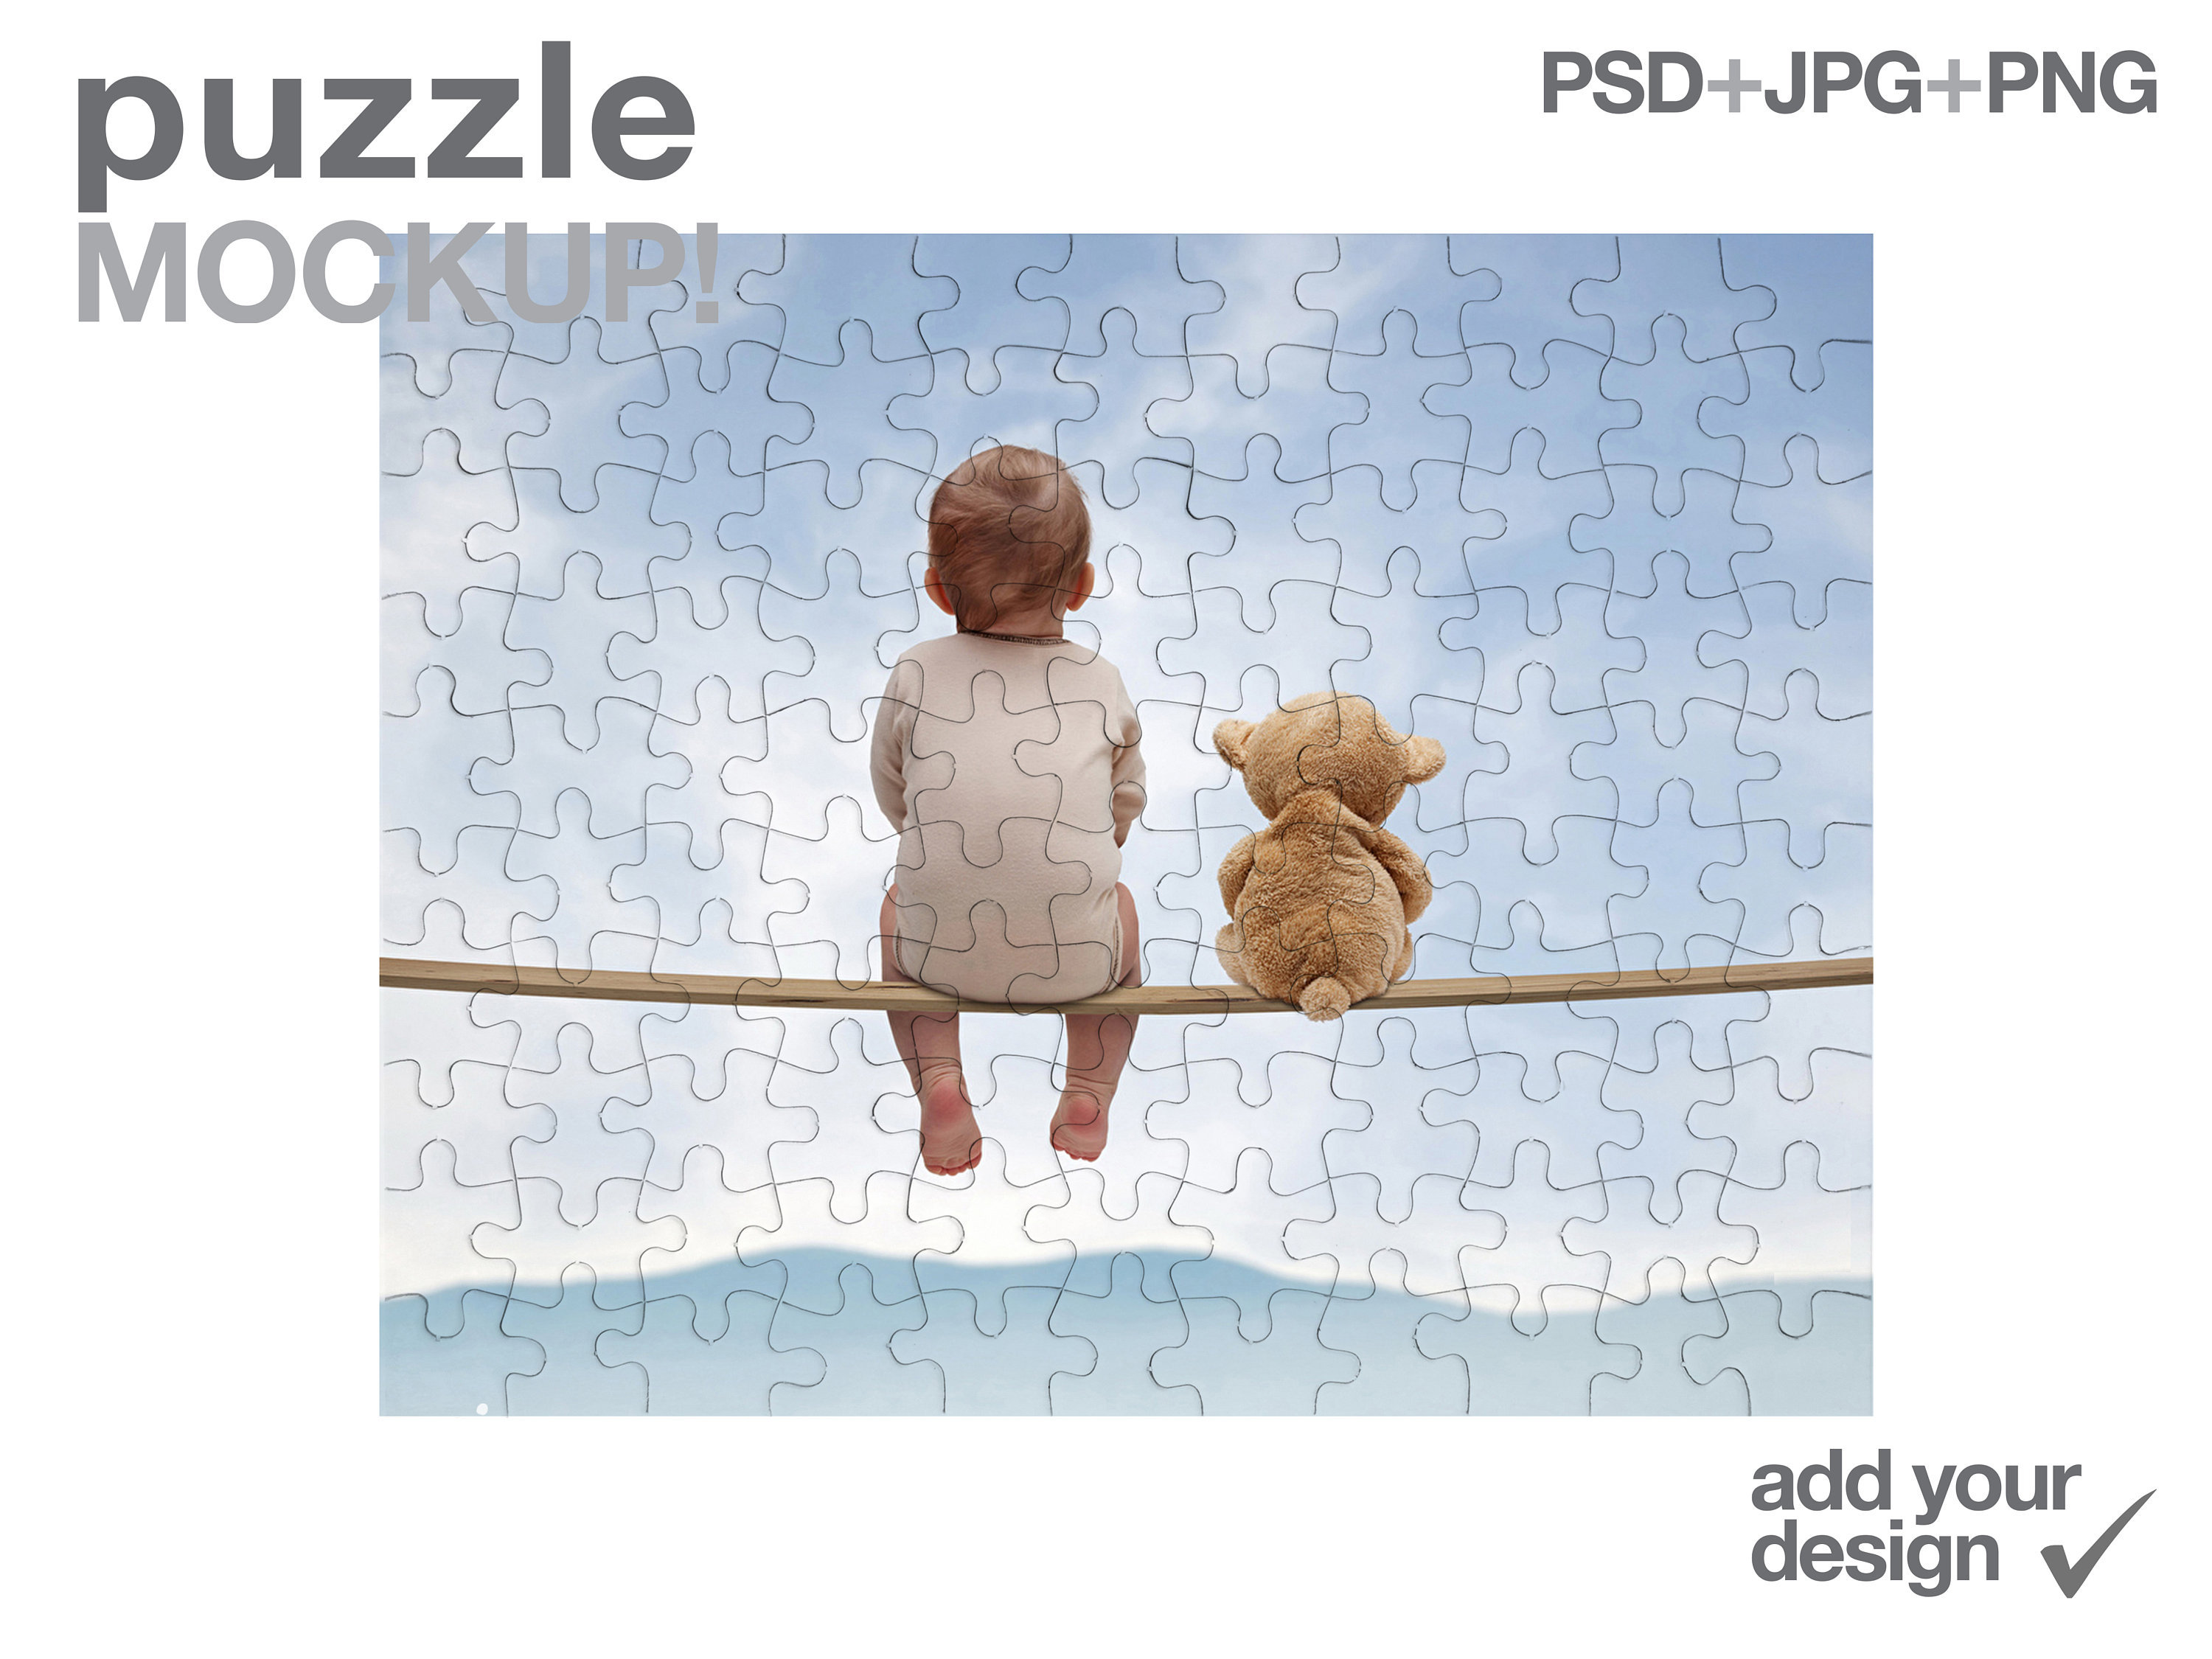 Download 110 pieces Puzzle Mockup / PSD Smart Object / Add your own | Etsy